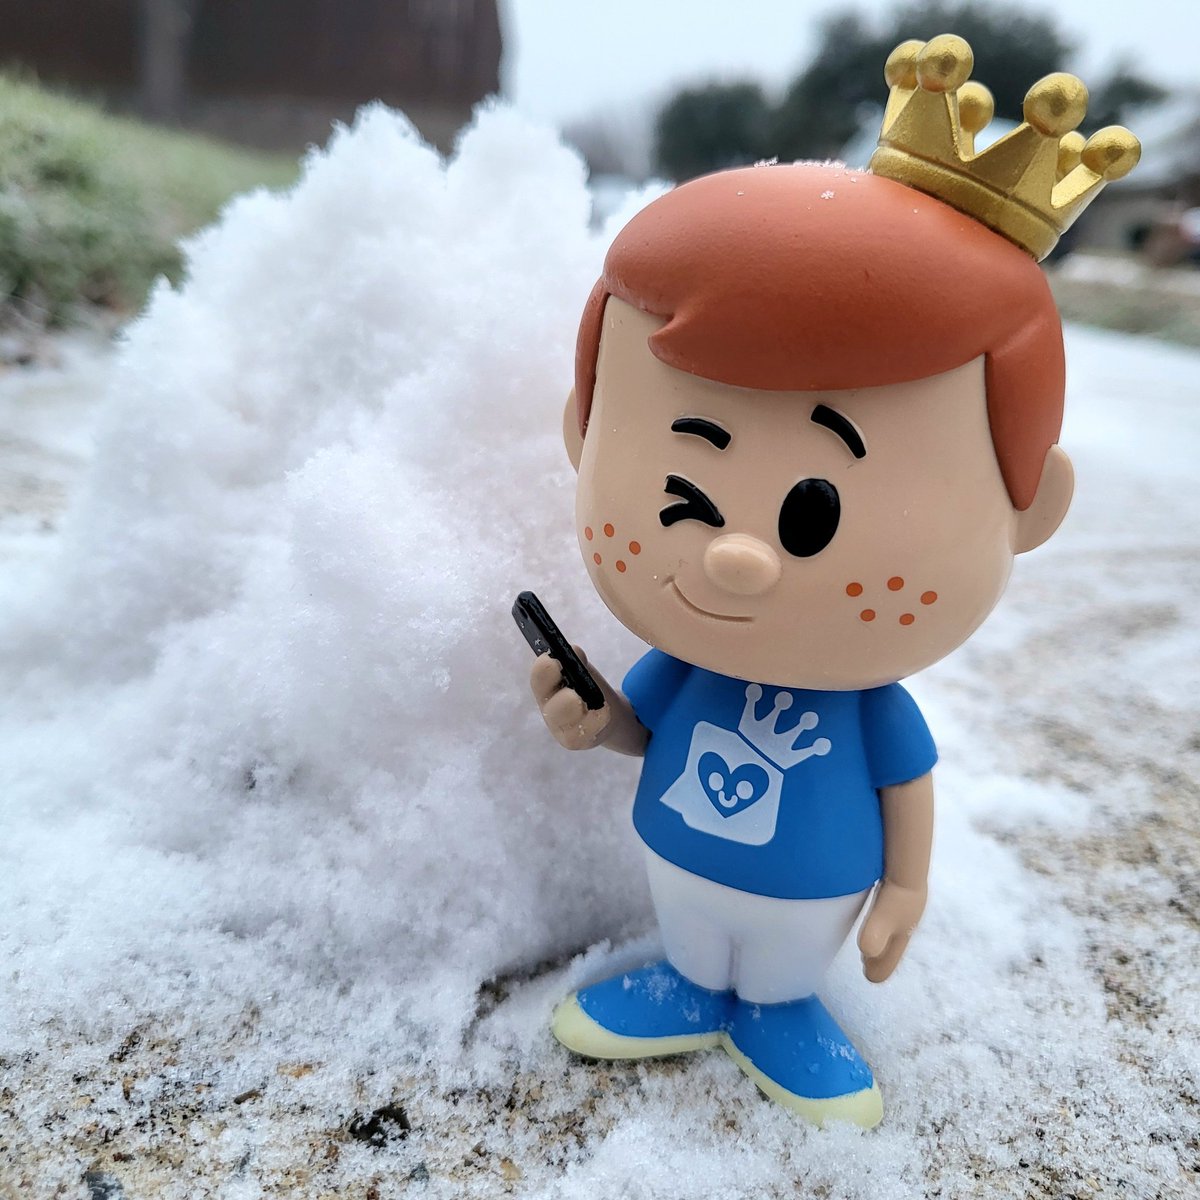 Freddy out there snapping photos of the light snow we got. @OriginalFunko